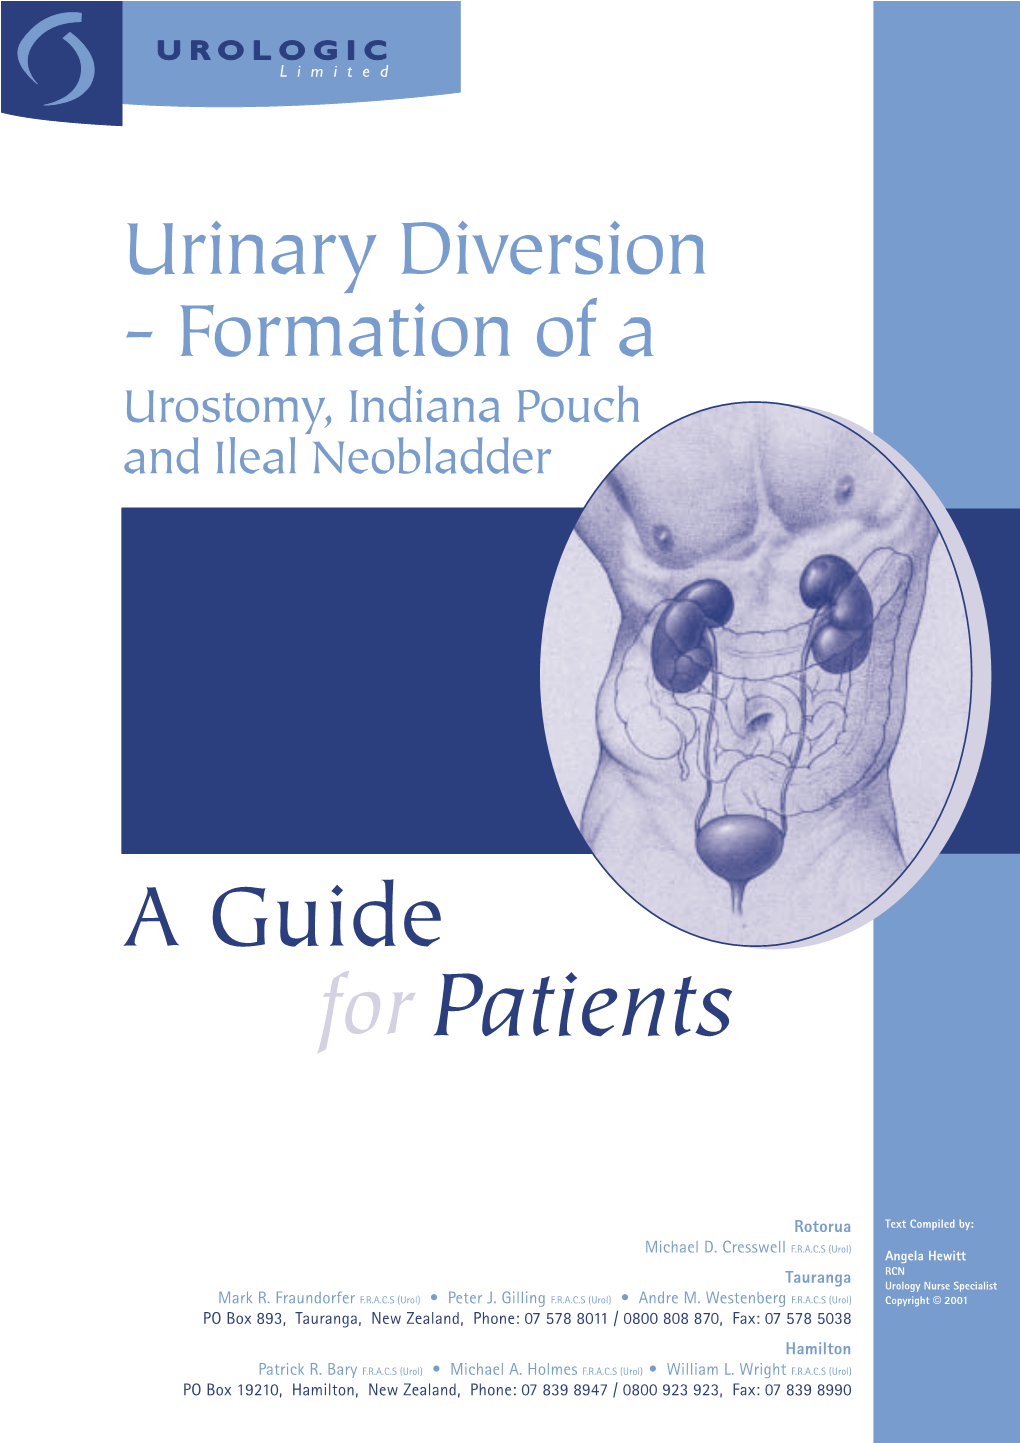 Urinary Diversion - Formation of a Urostomy, Indiana Pouch and Ileal Neobladder